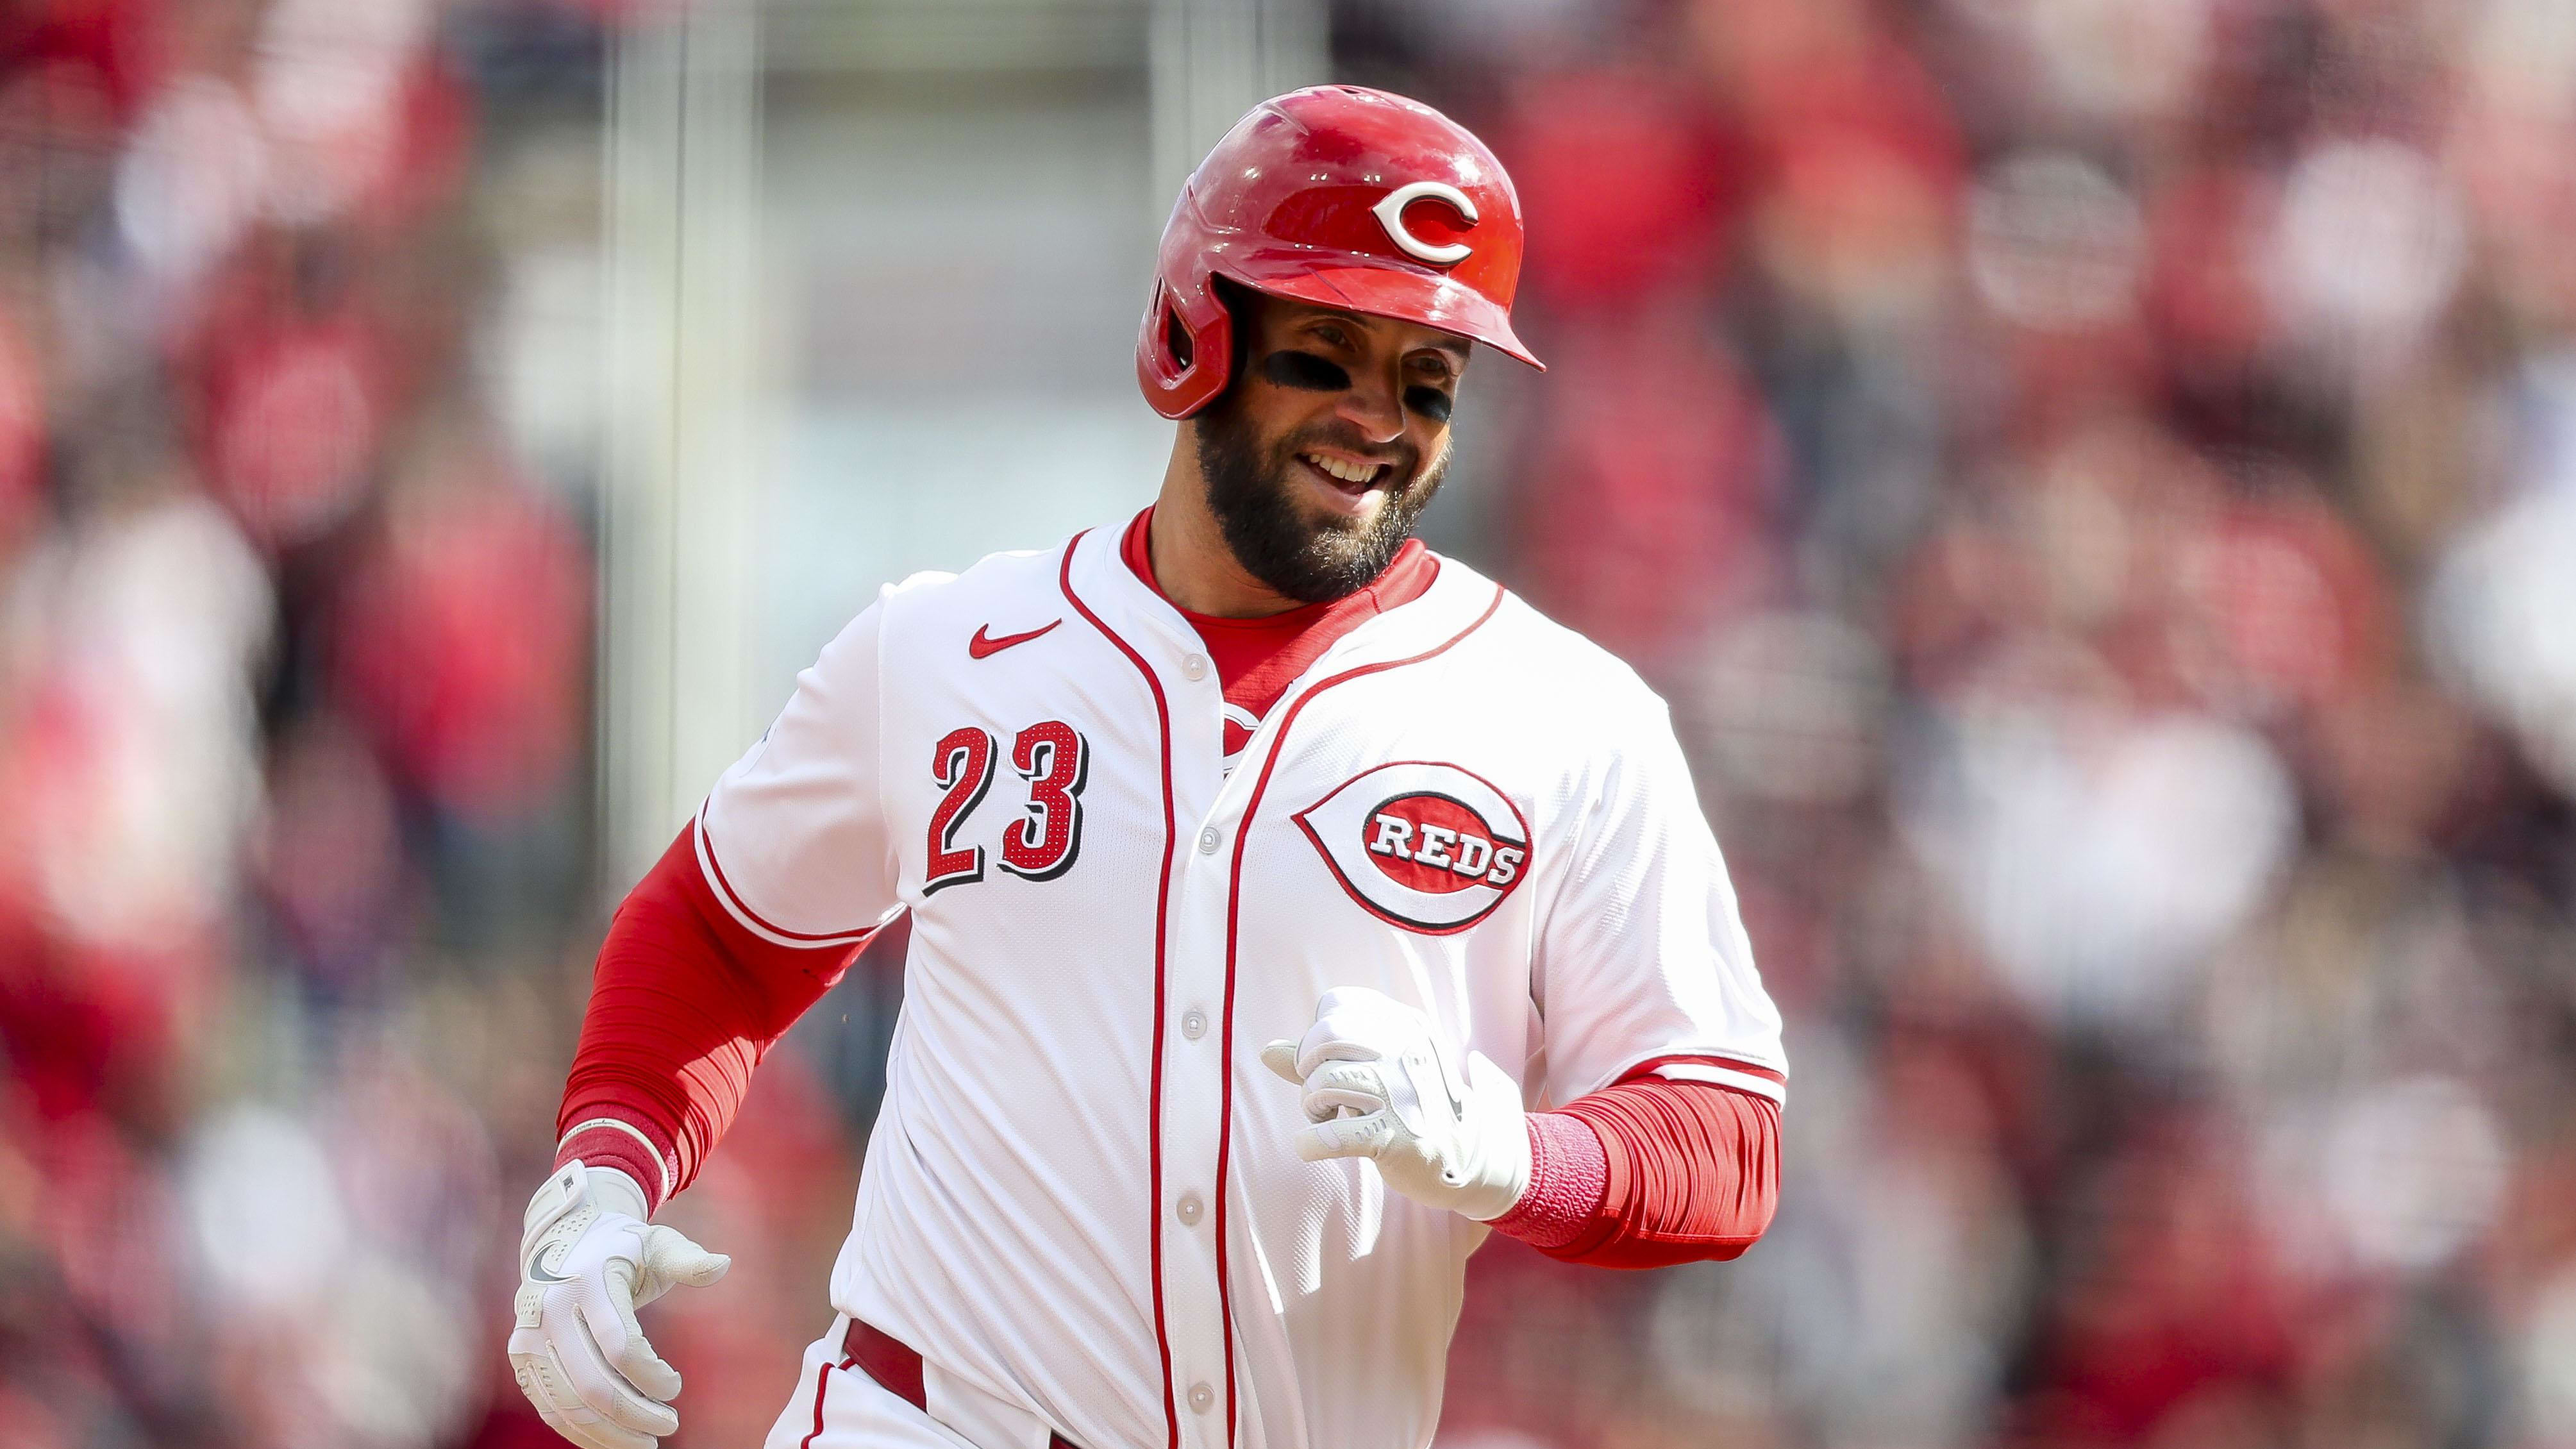 Watch: Nick Martini Hits Two Home Runs on Opening Day, Cincinnati Reds Take  7-0 Lead Over Washington Nationals